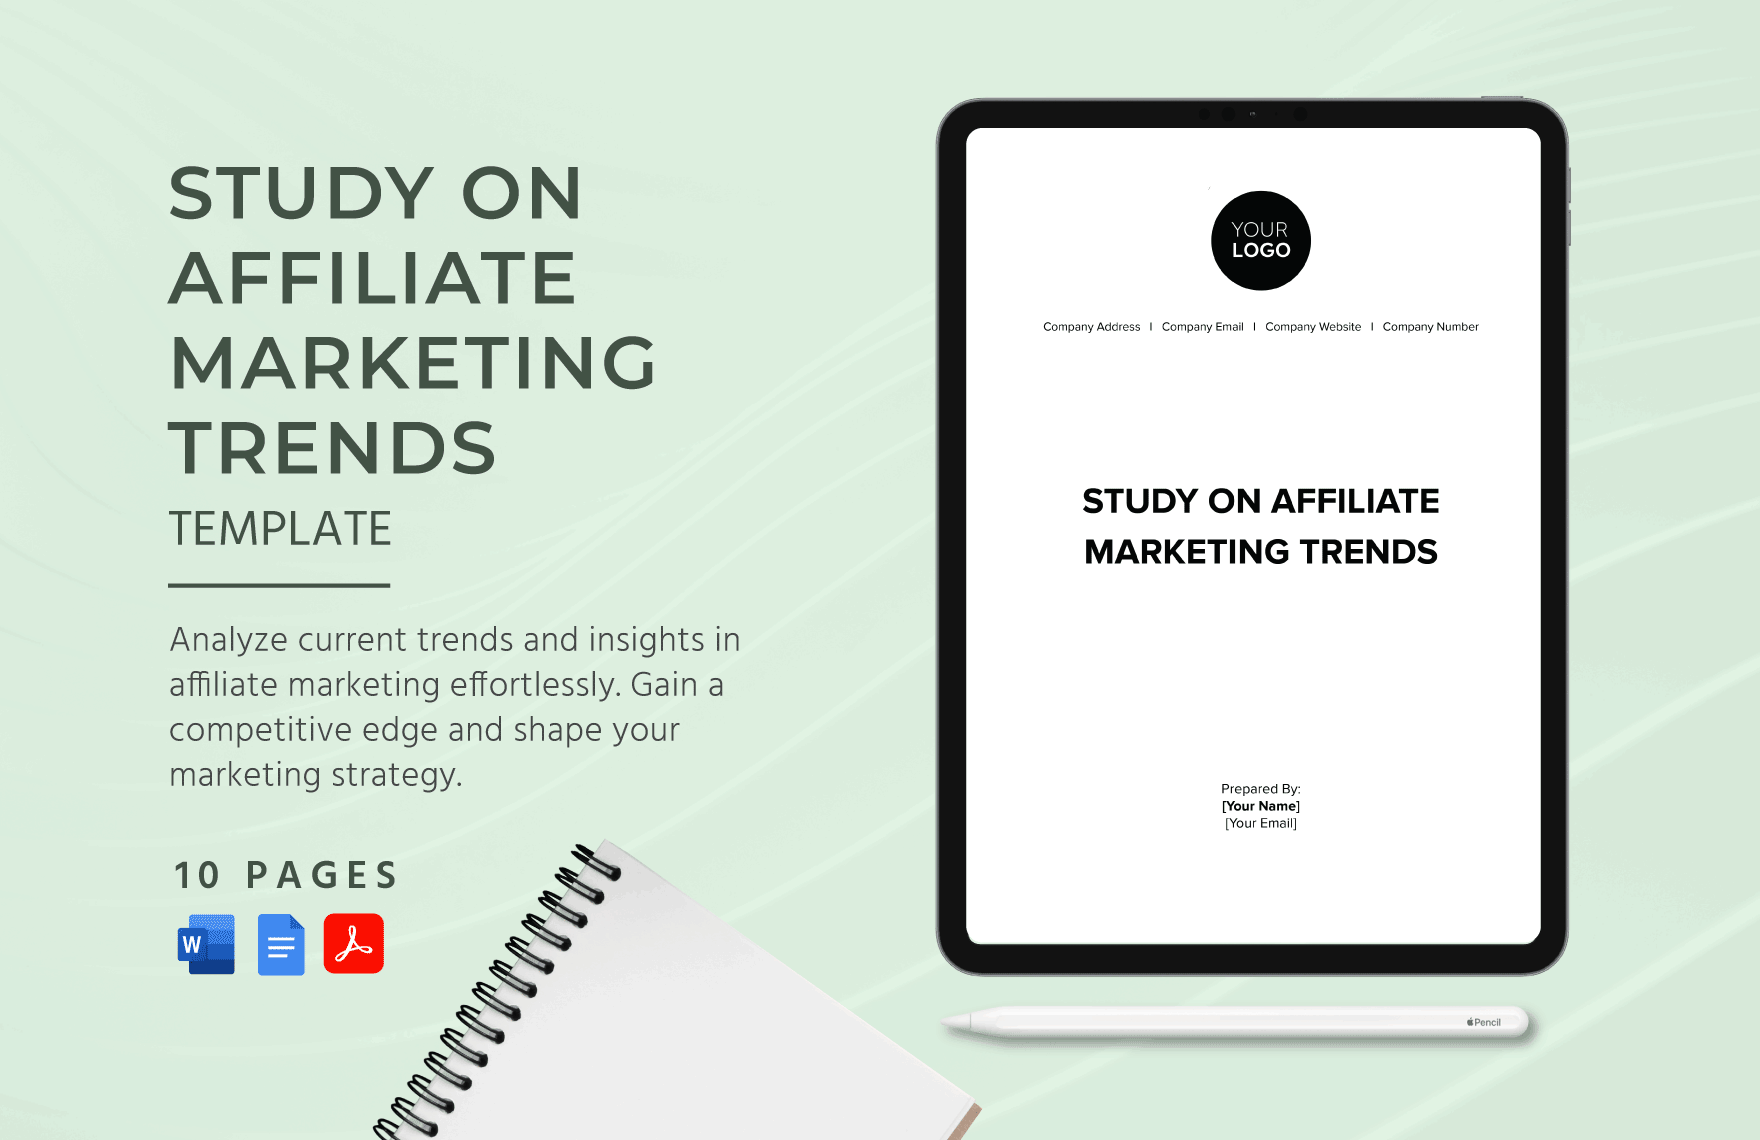 Study on Affiliate Marketing Trends Template